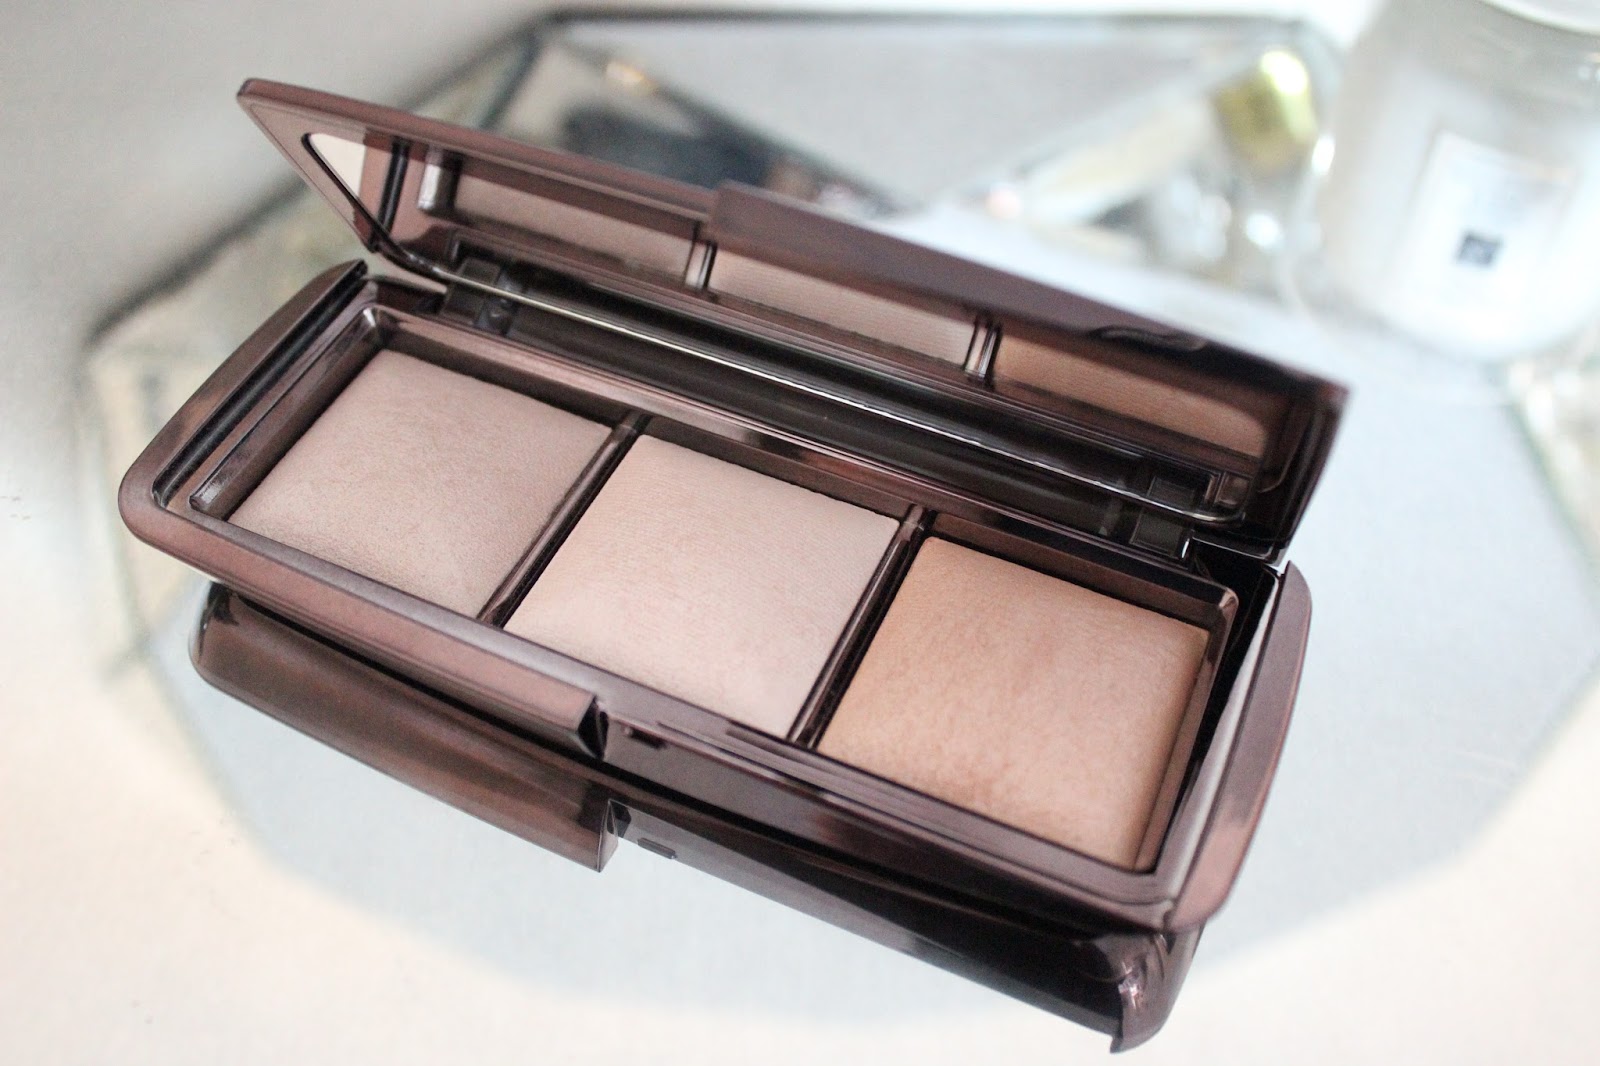 Hourglass Ambient Lighting Palette - a little pop of coral.